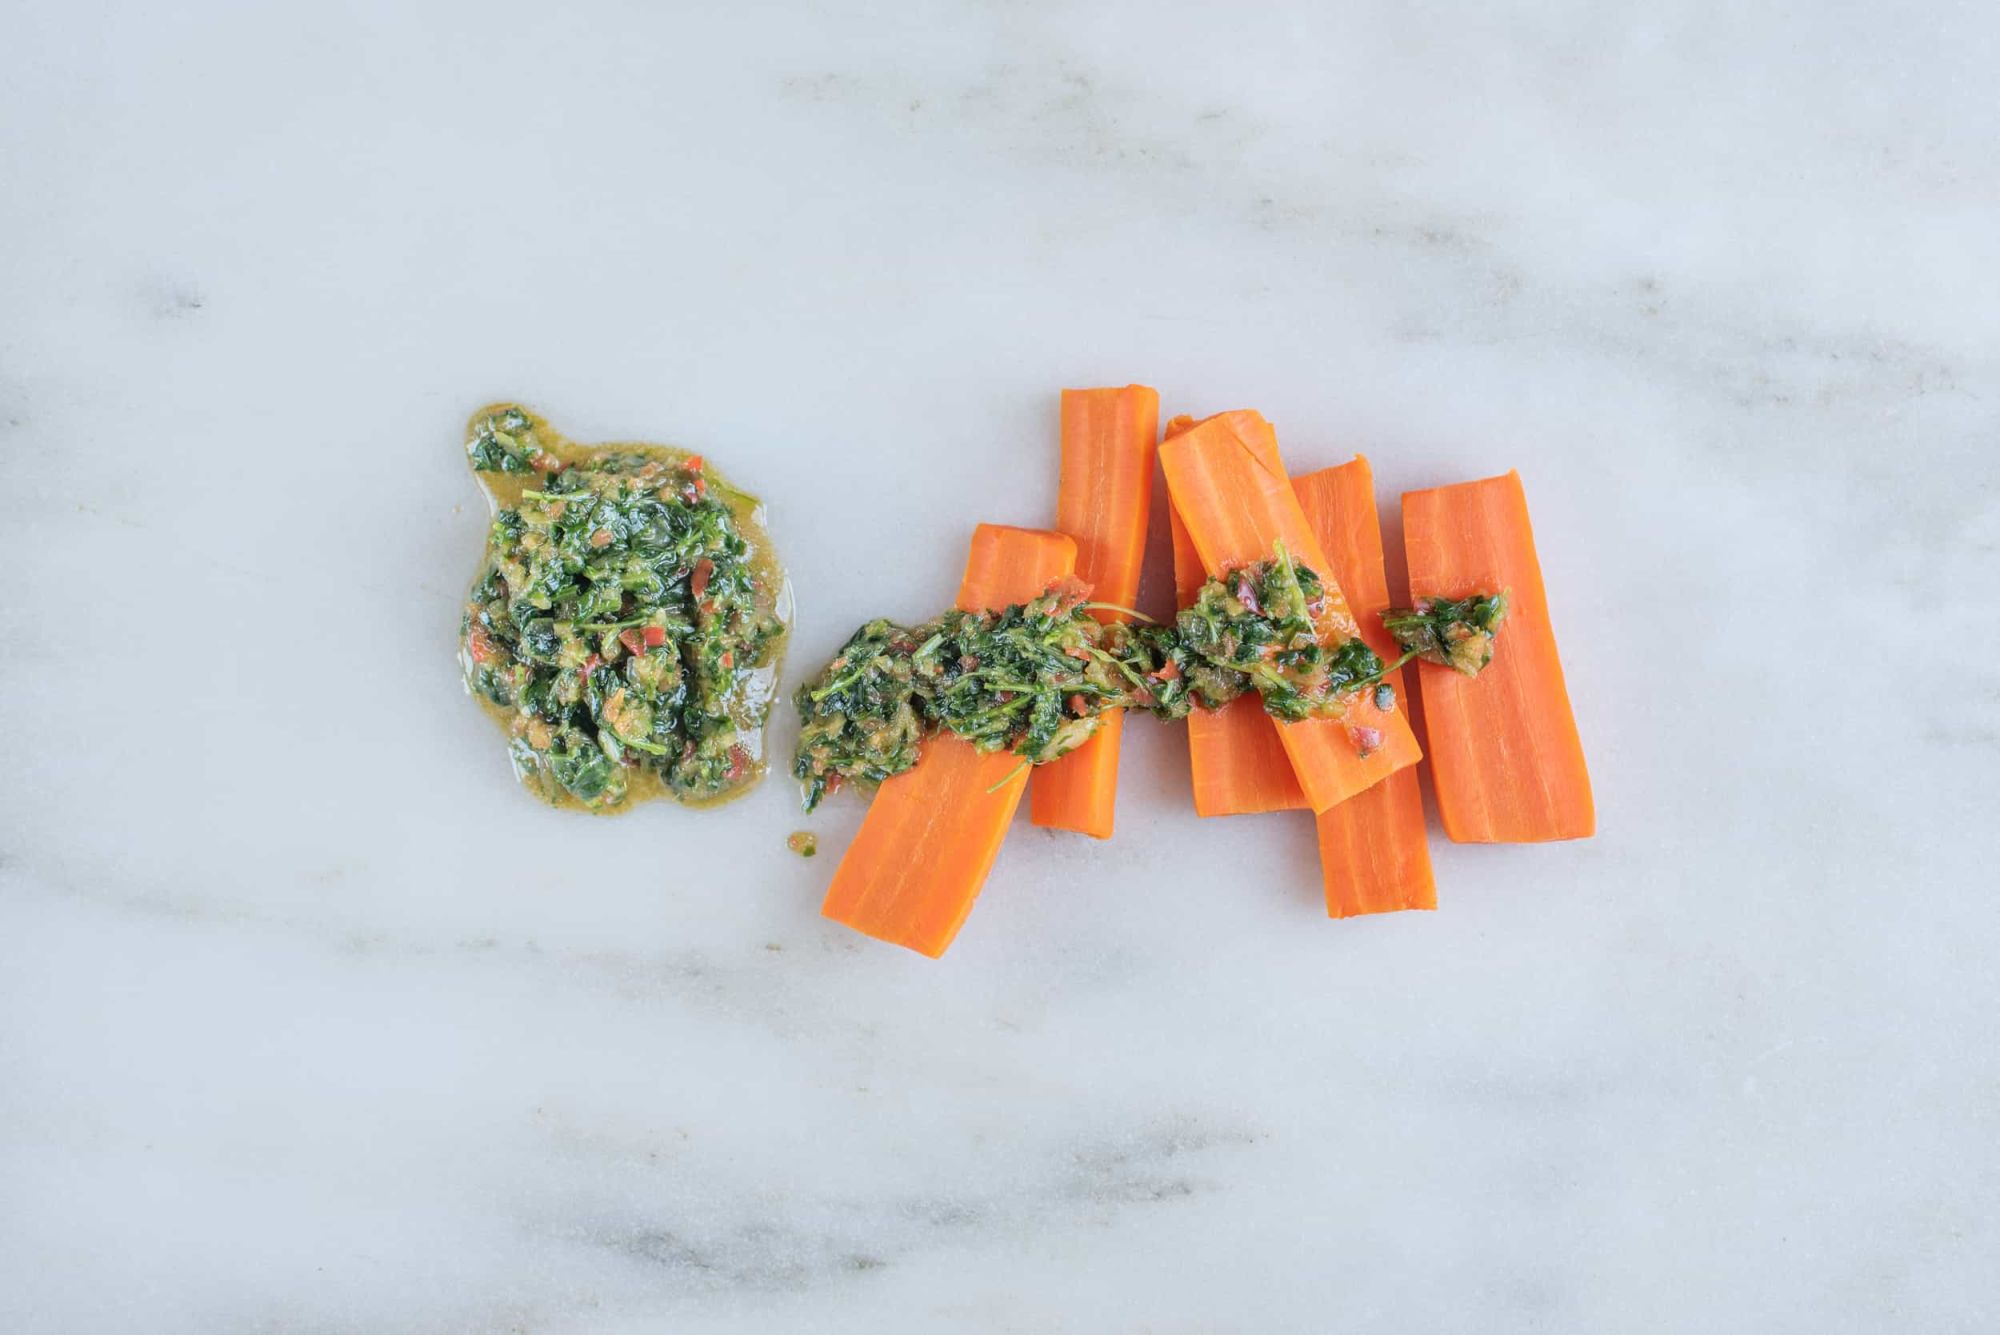 six cooked carrot sticks with cilantro and pepper sauce drizzled on top on a white background